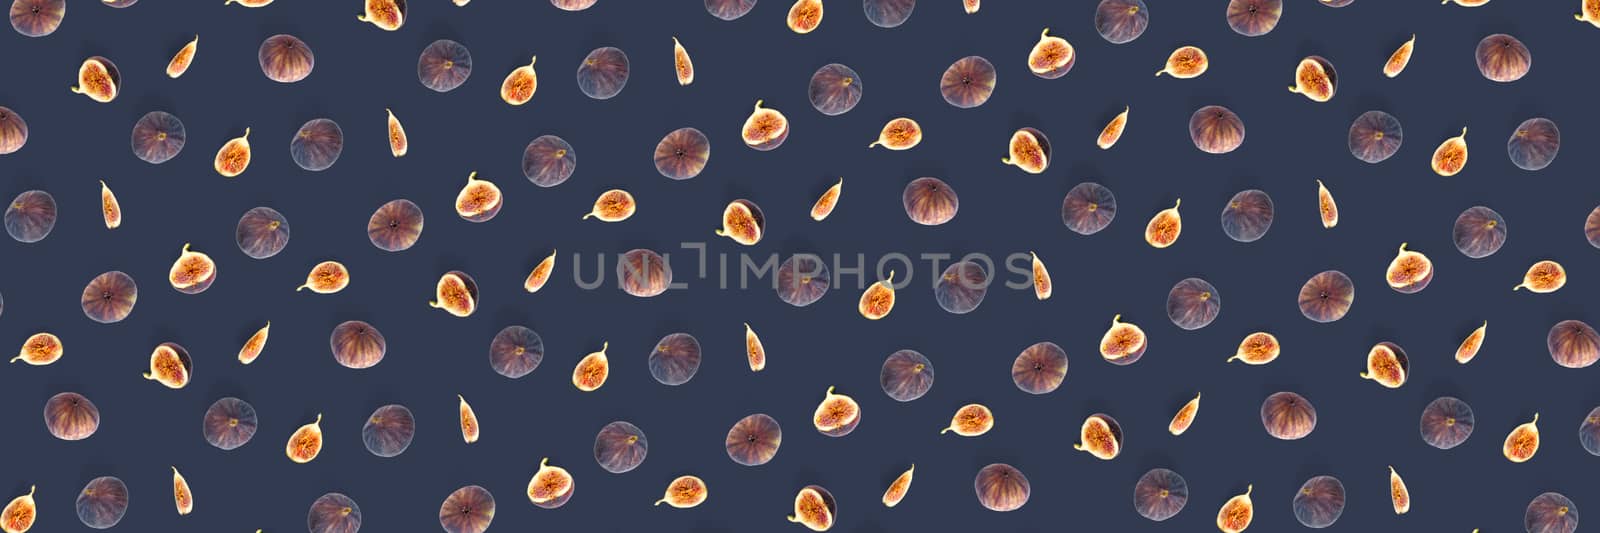 Background from Fresh figs. Food Photo. Creative set of the whole and sliced figs on a purpule background, Modern fig fruits background. by PhotoTime